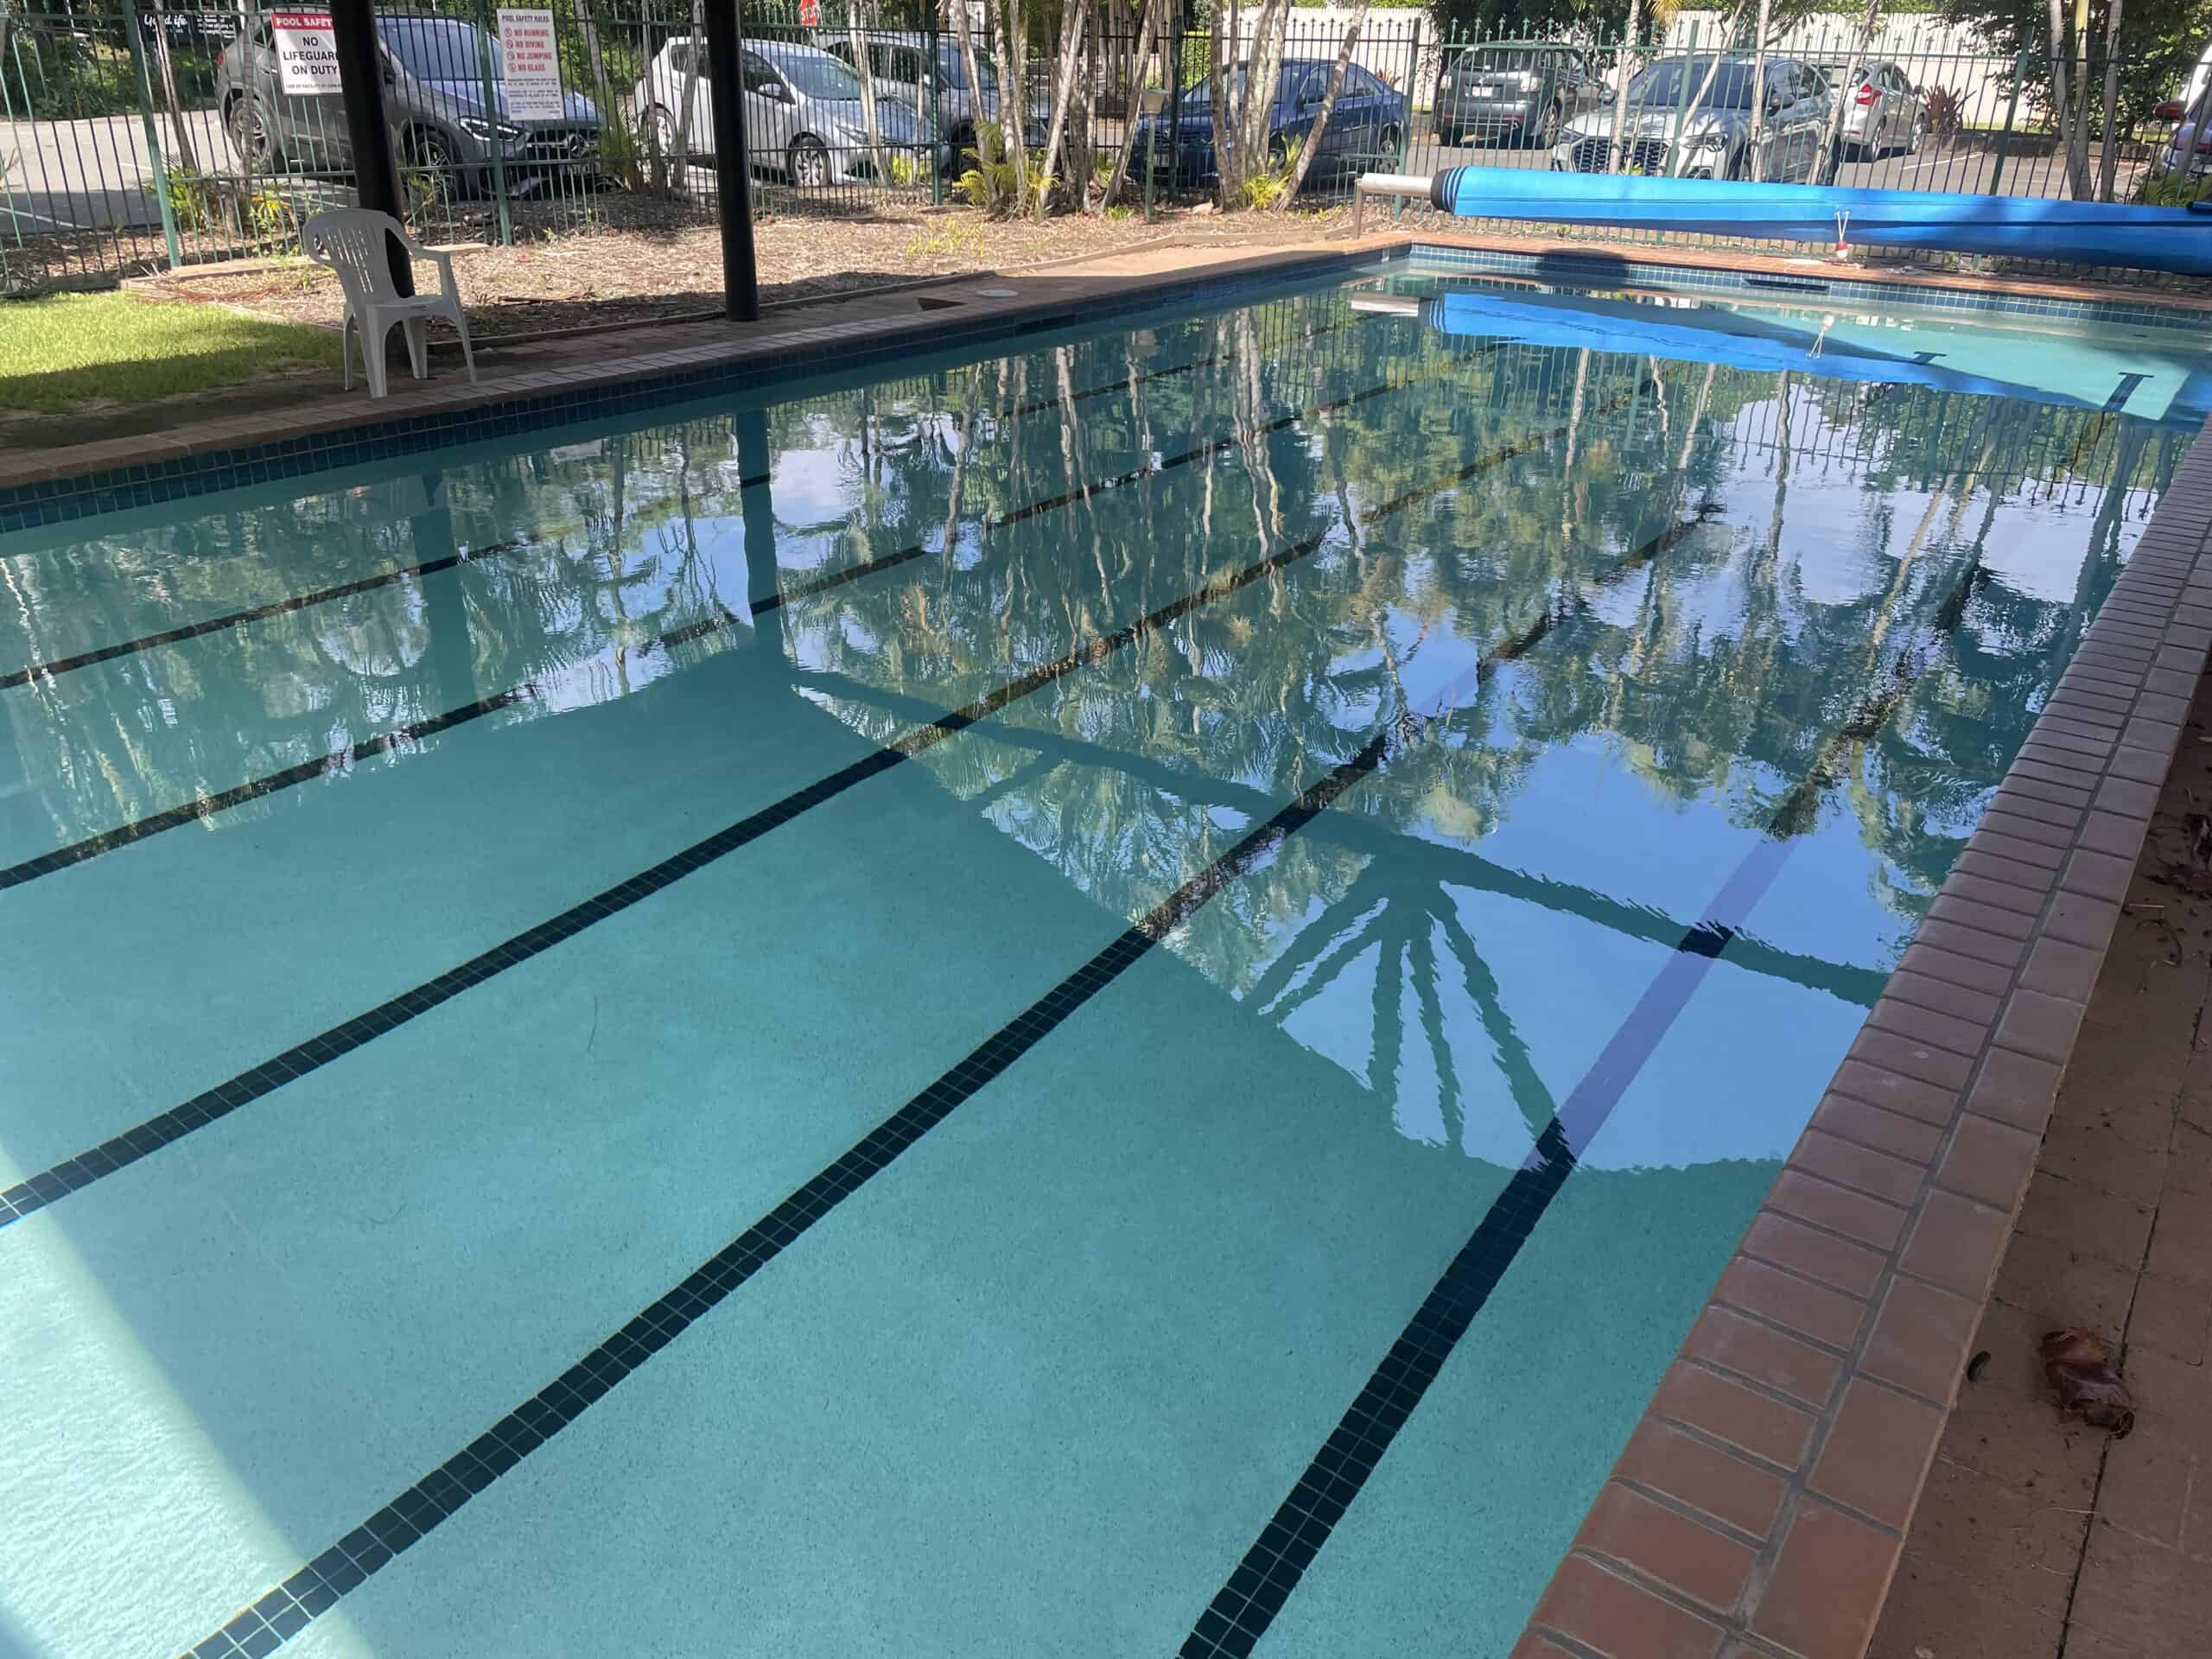 Pool with lanes with a pool cover rolled up at one end